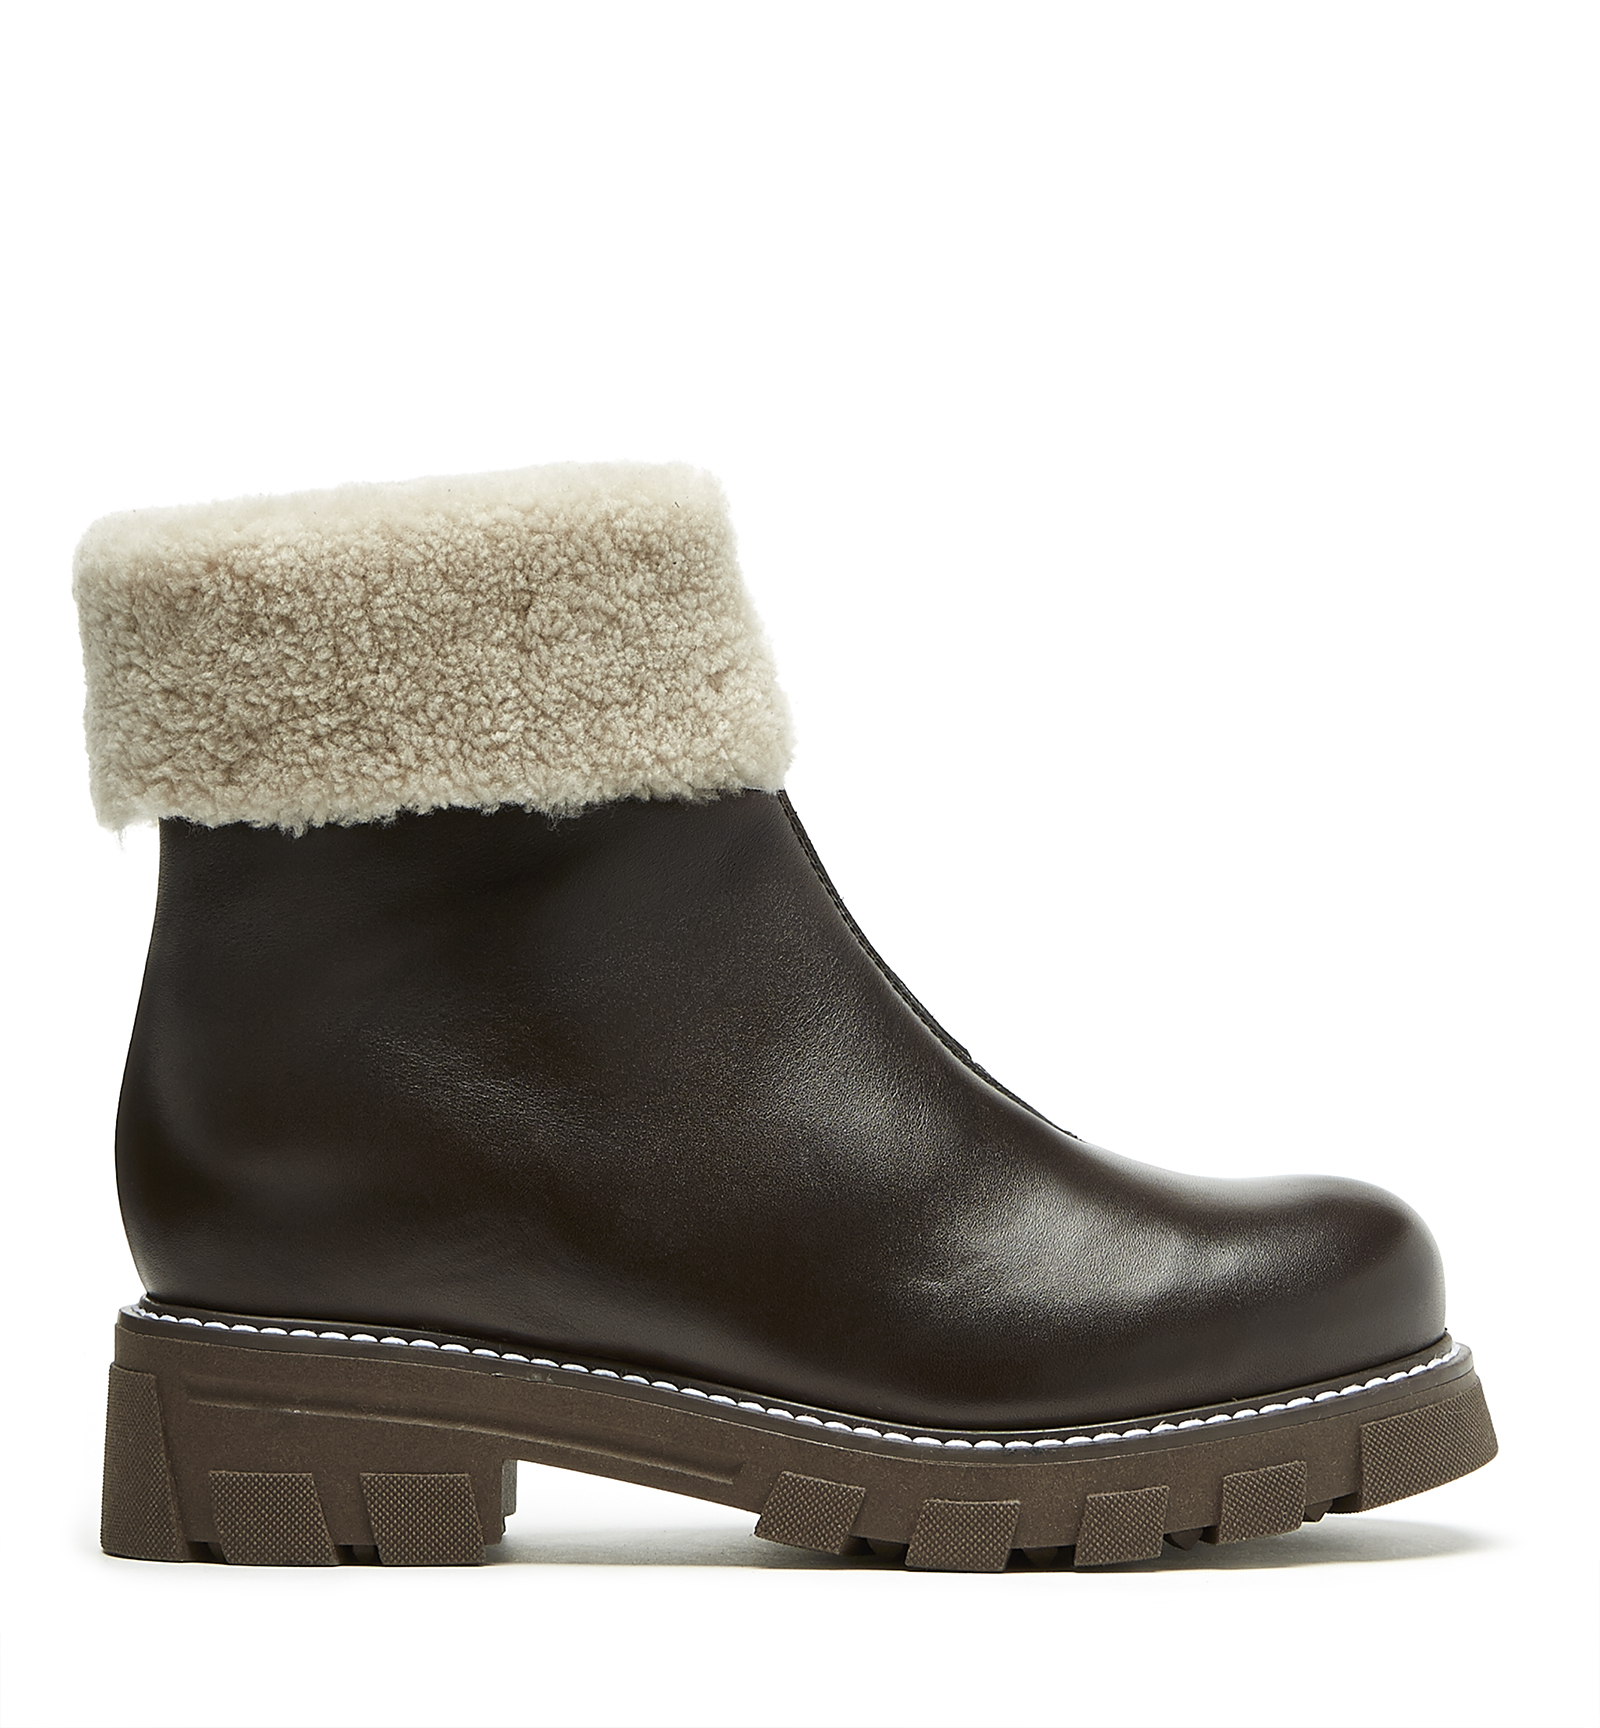 Shearling - Style - Boots  La Canadienne USA Boutique